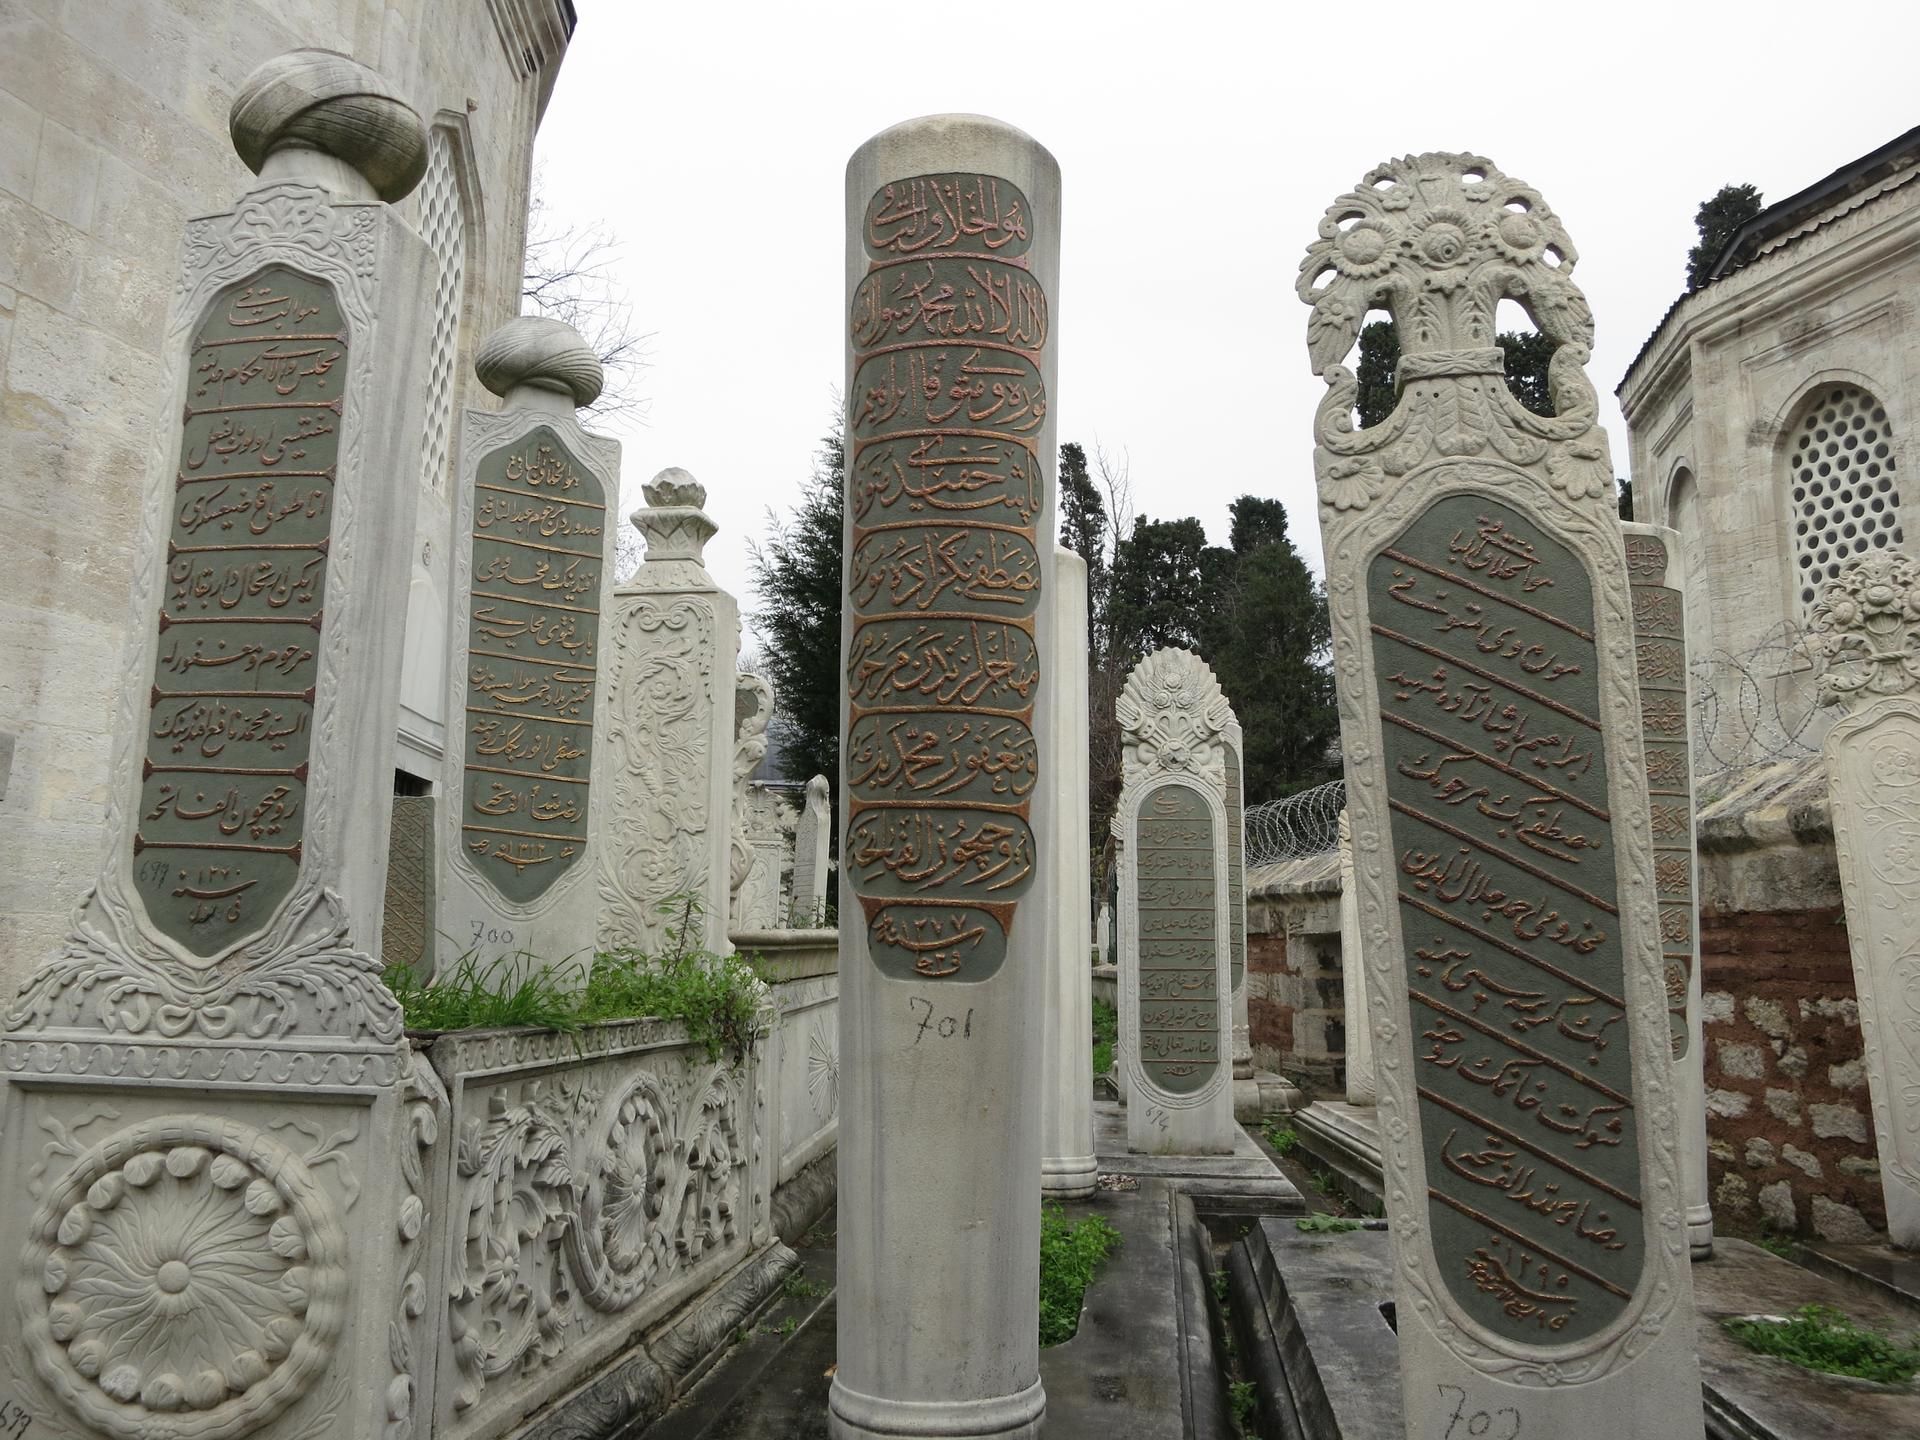 Tombstones in a cemetery next to the Eyup Sultan Mosque in Istanbul. The epitaphs are written in Ottoman Turkish, which most modern Turks can't read or understand.